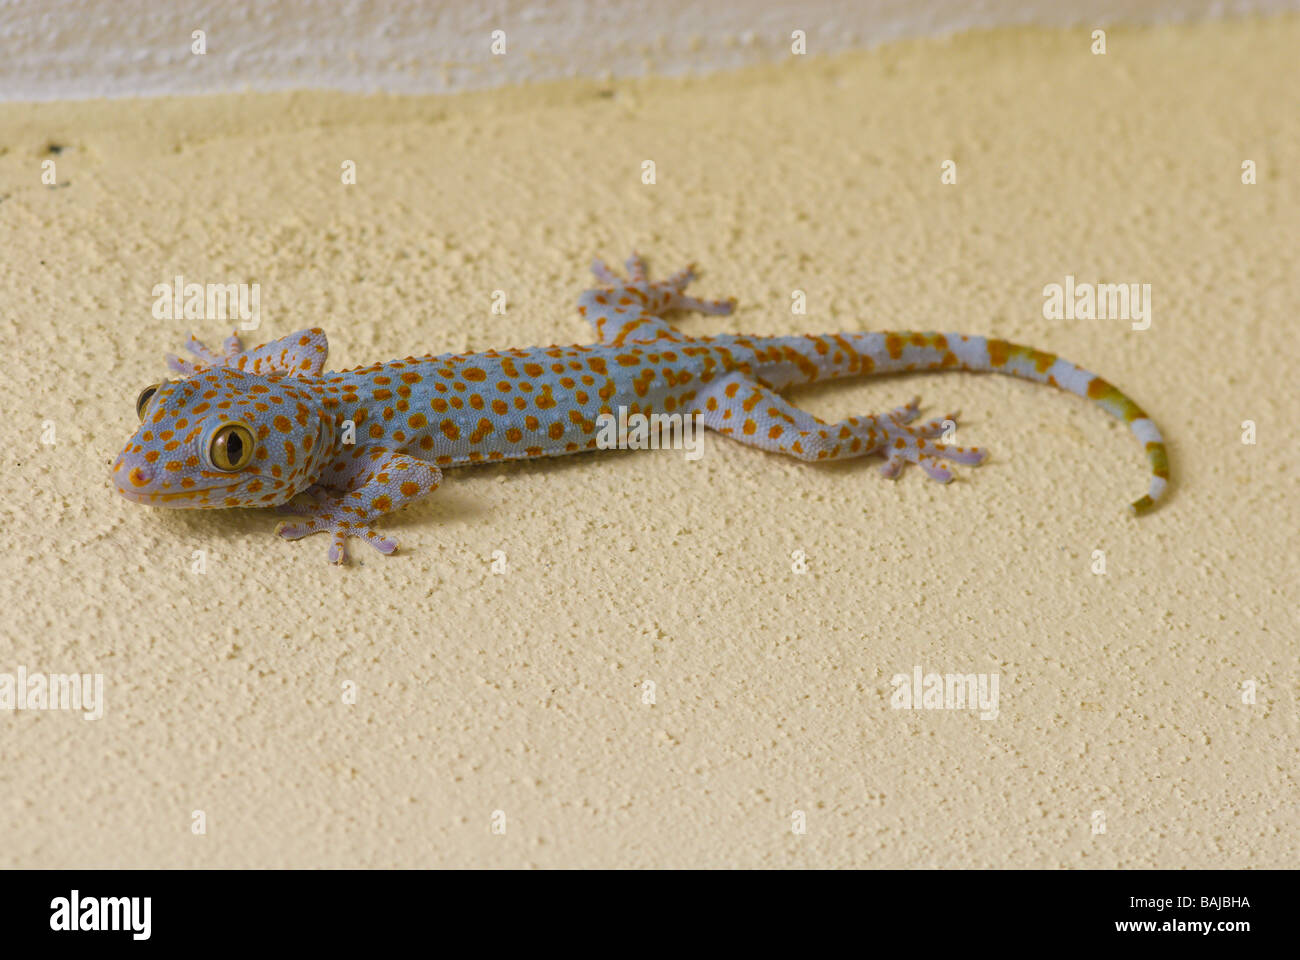 A lizard or skink grips a wall on the Malaysian island of Langkawi Stock Photo